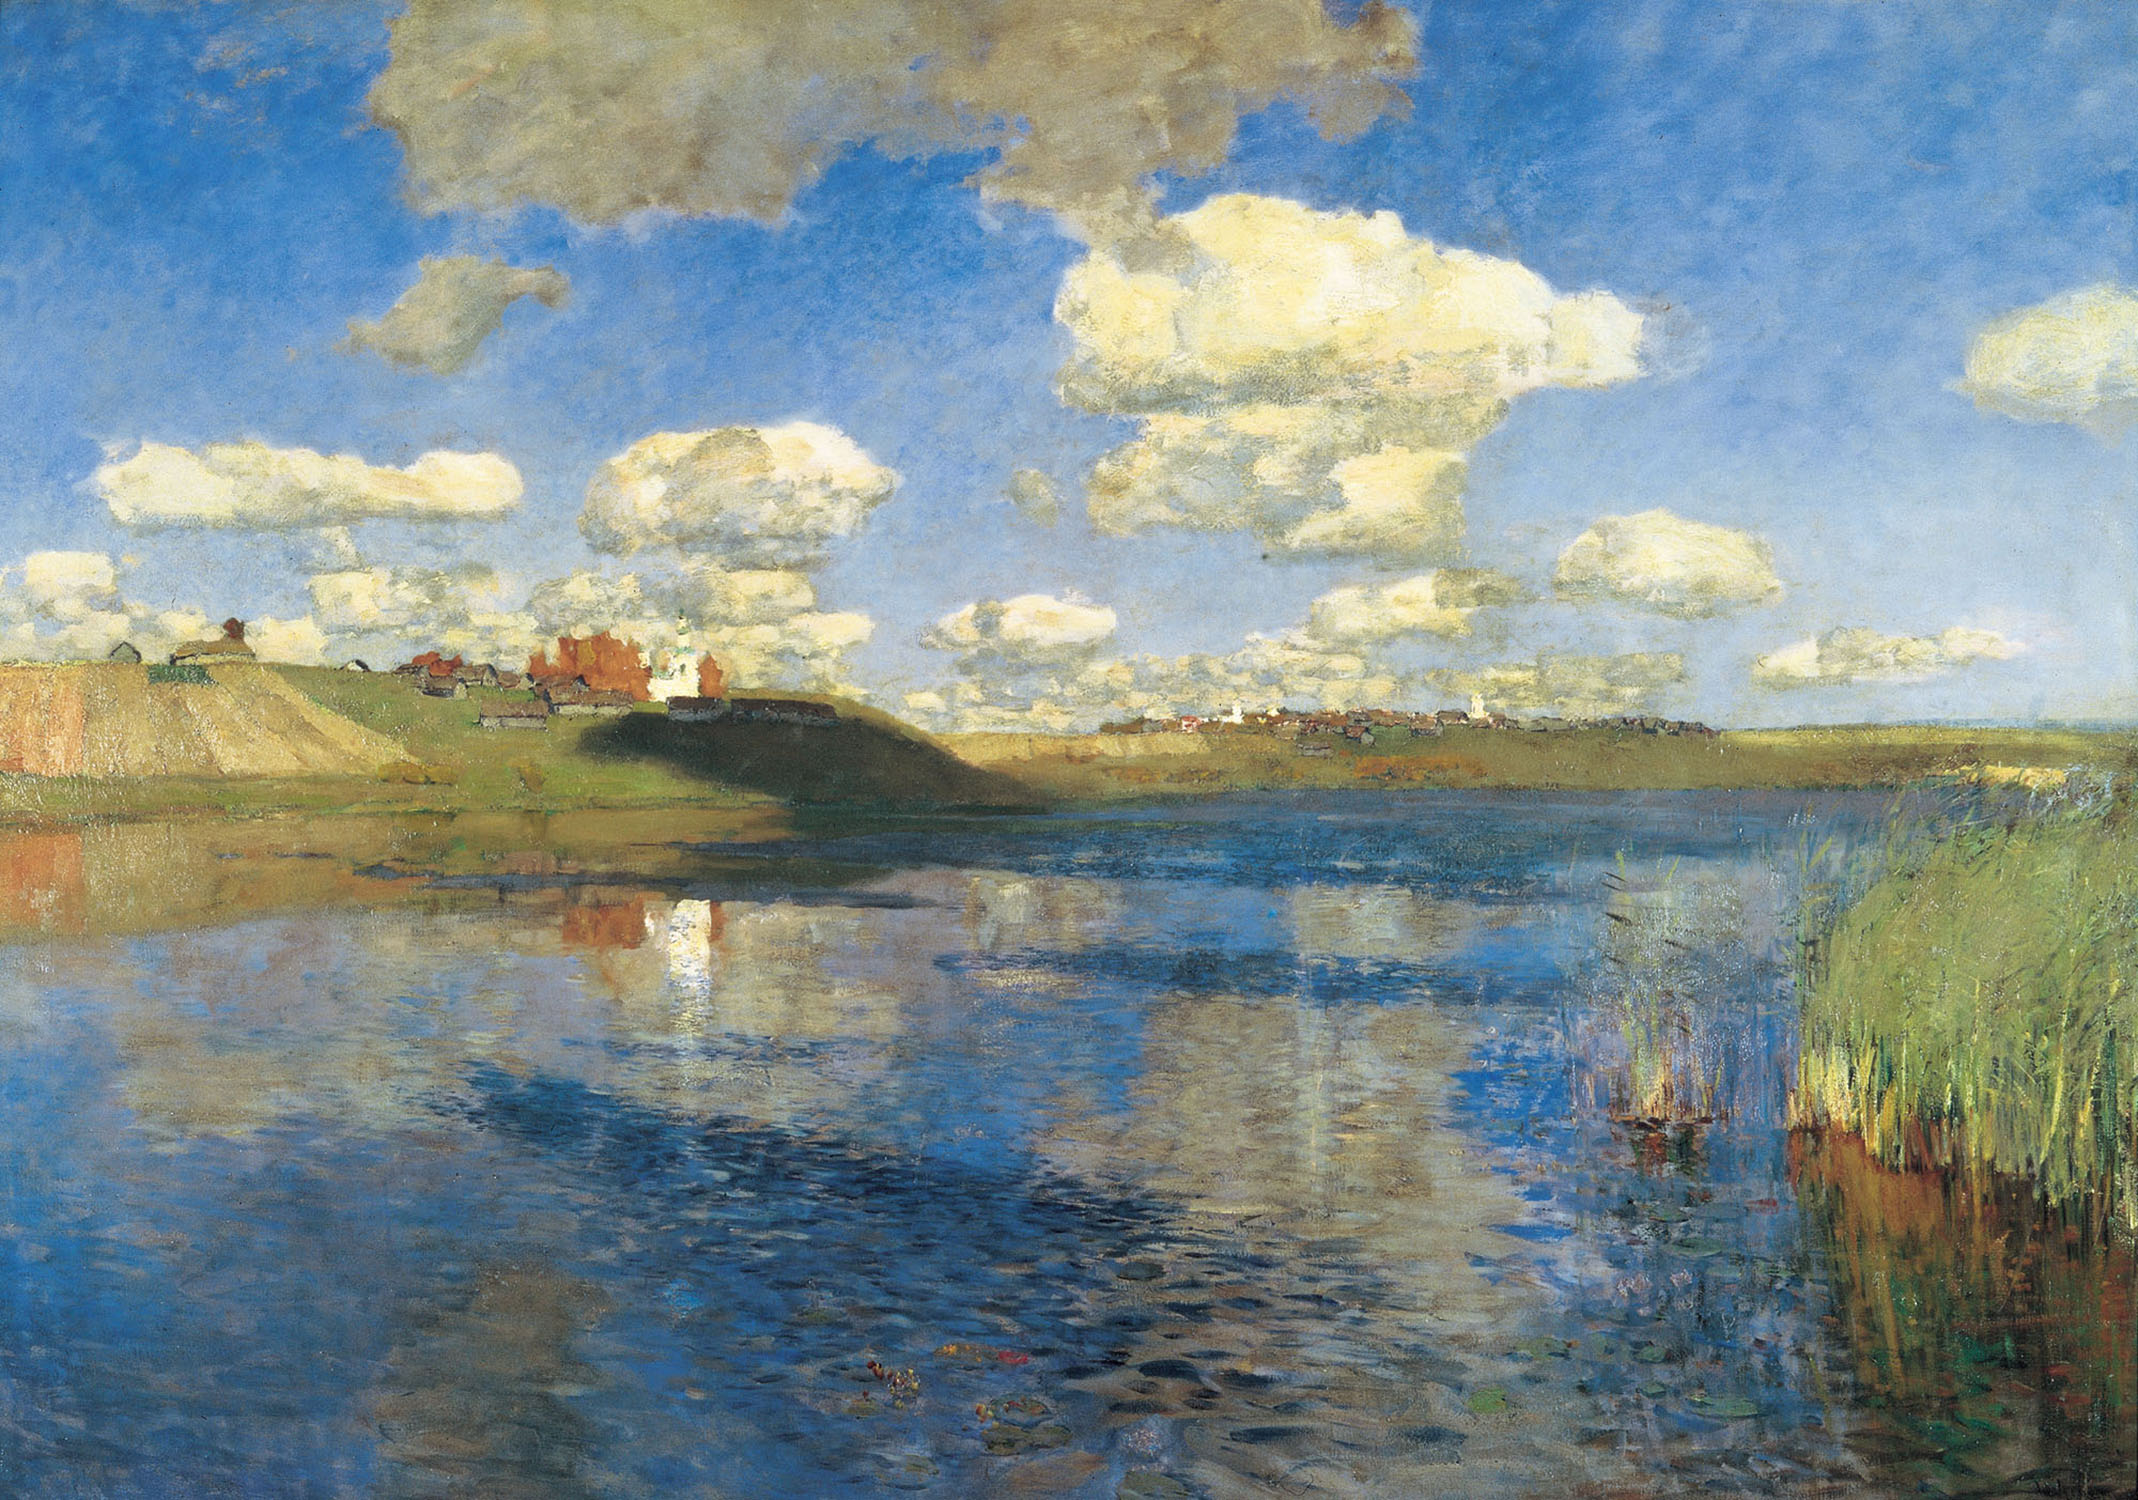 Lake by Isaac Ilich Levitan - 1899–1900 - 149 x 208 cm State Russian Museum